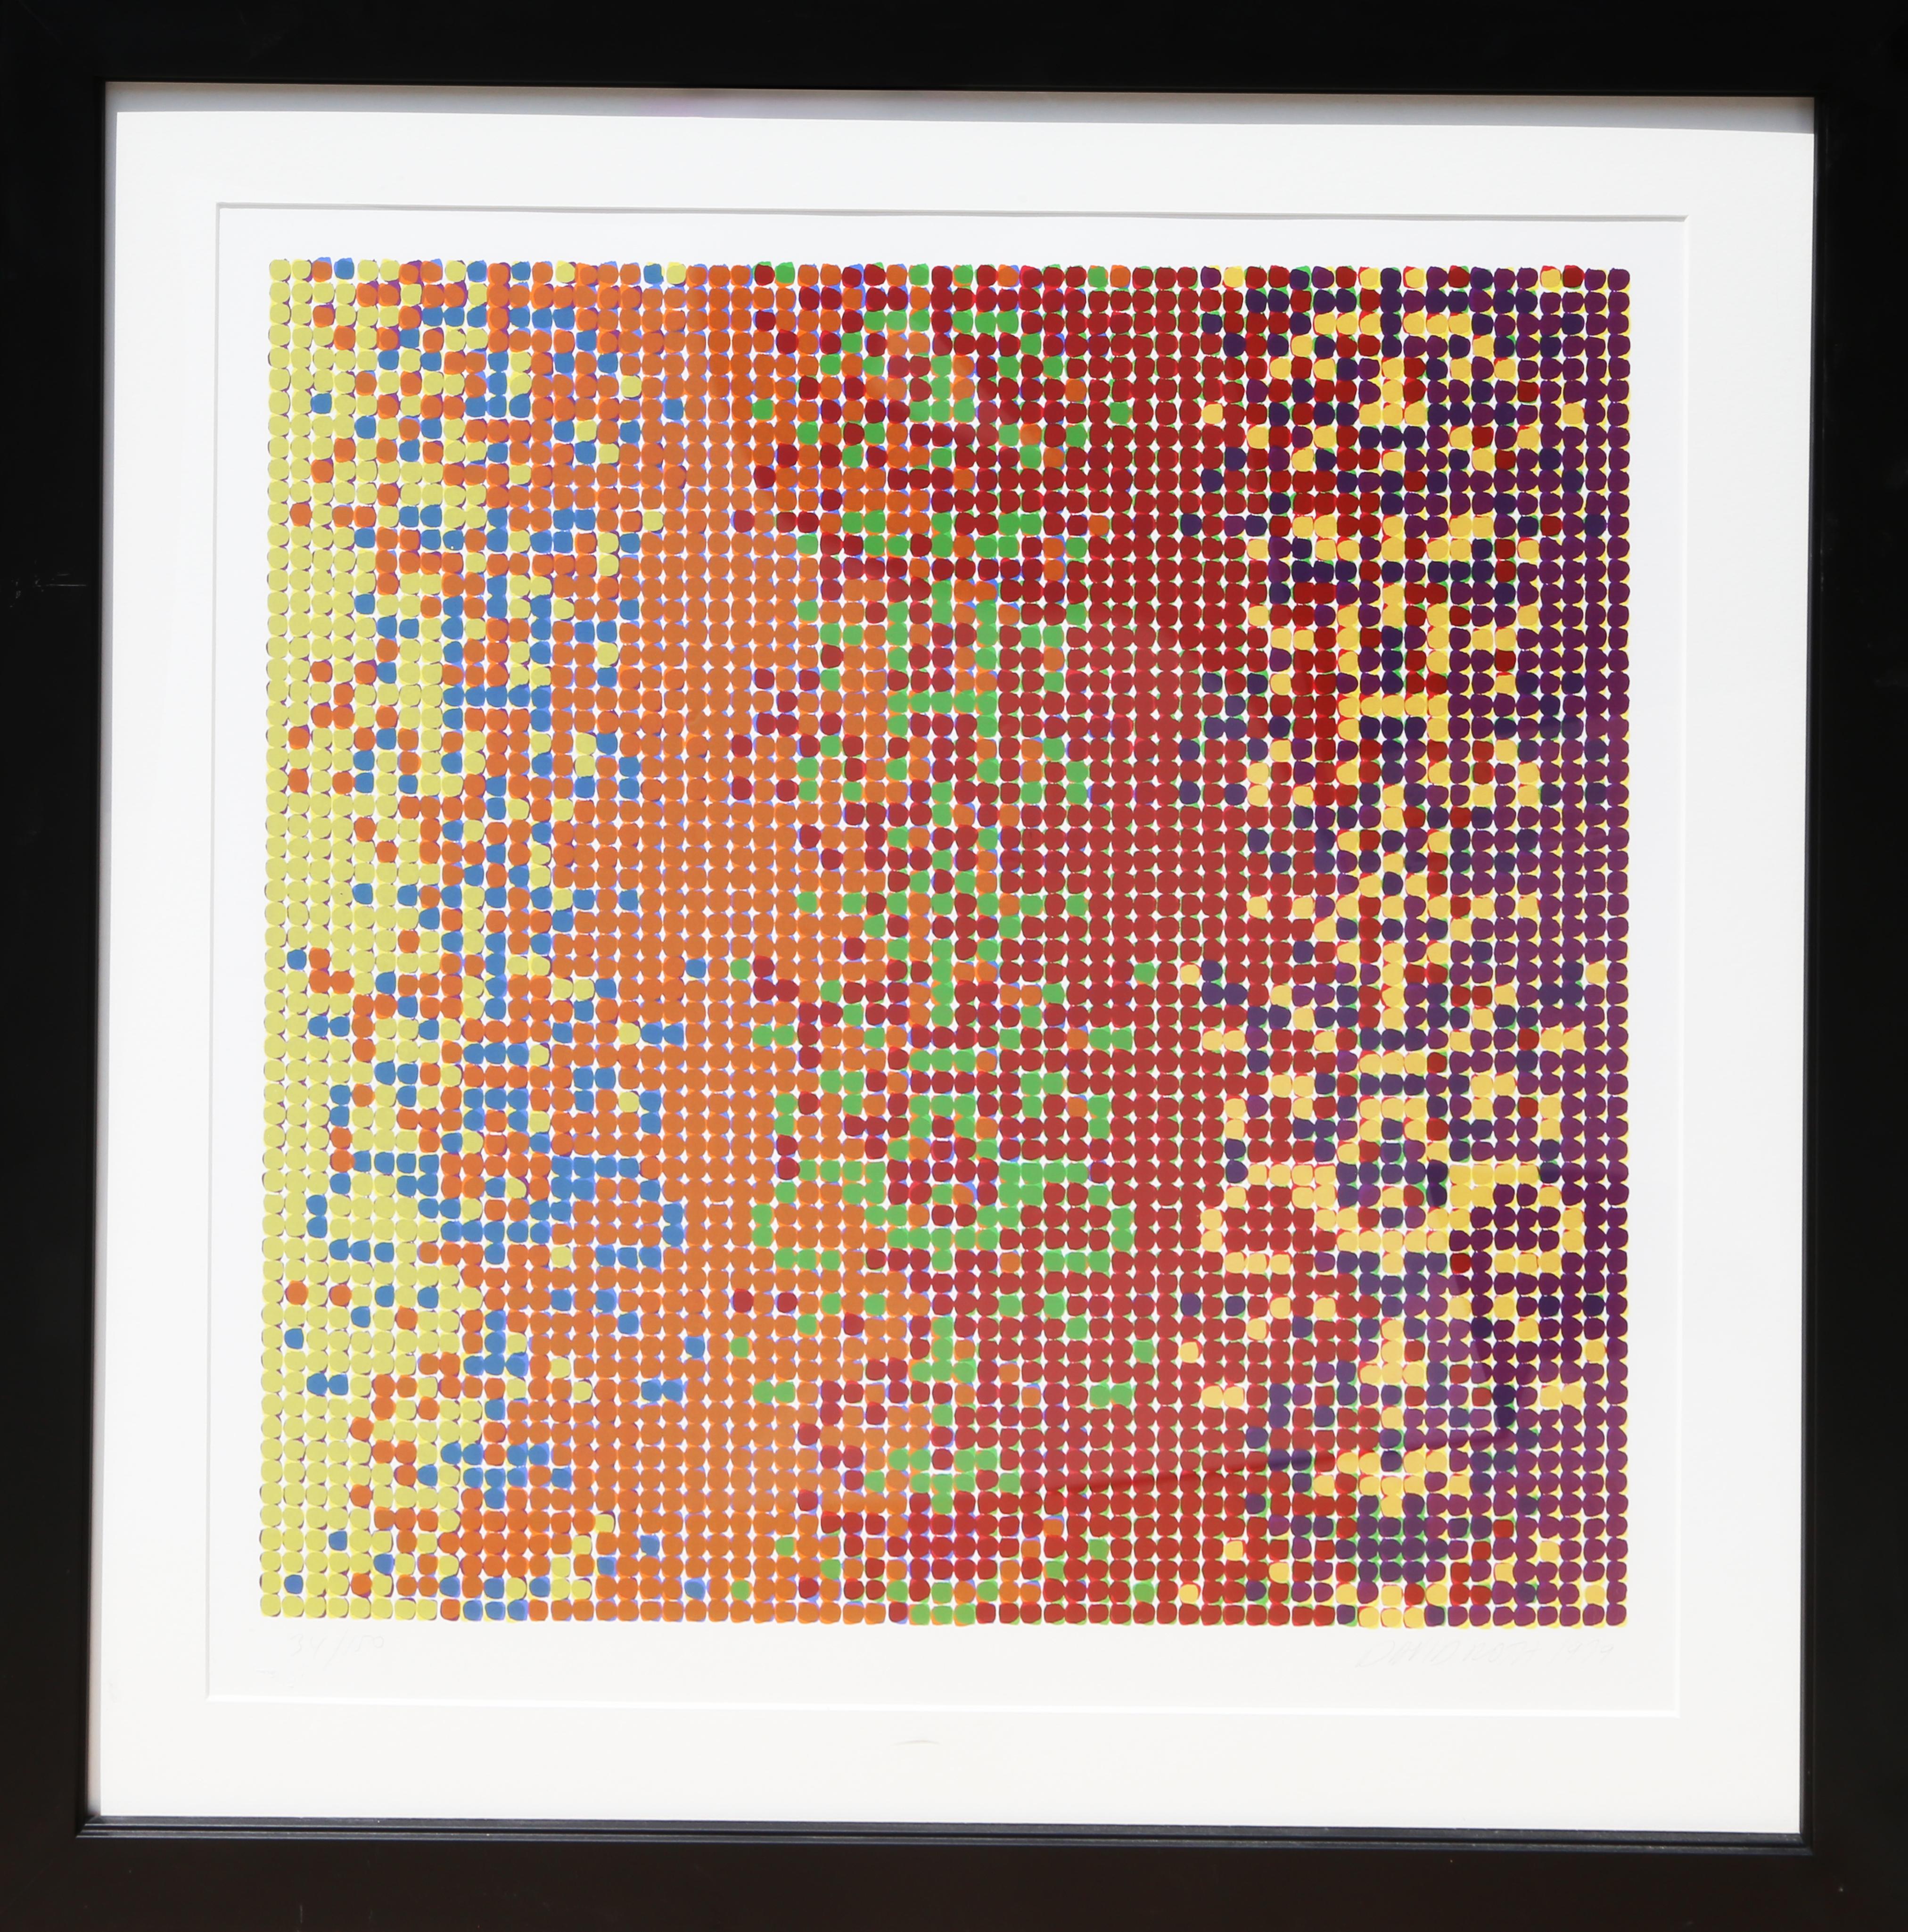 Luminous Op Art print by David Roth. Nicely matted and framed in black.

Untitled 23
David Roth, American (1942)
Date: 1979
Screenprint, signed and numbered in pencil
Edition of 150
Image Size: 23 x 23 inches
Size: 29 x 29 in. (73.66 x 73.66